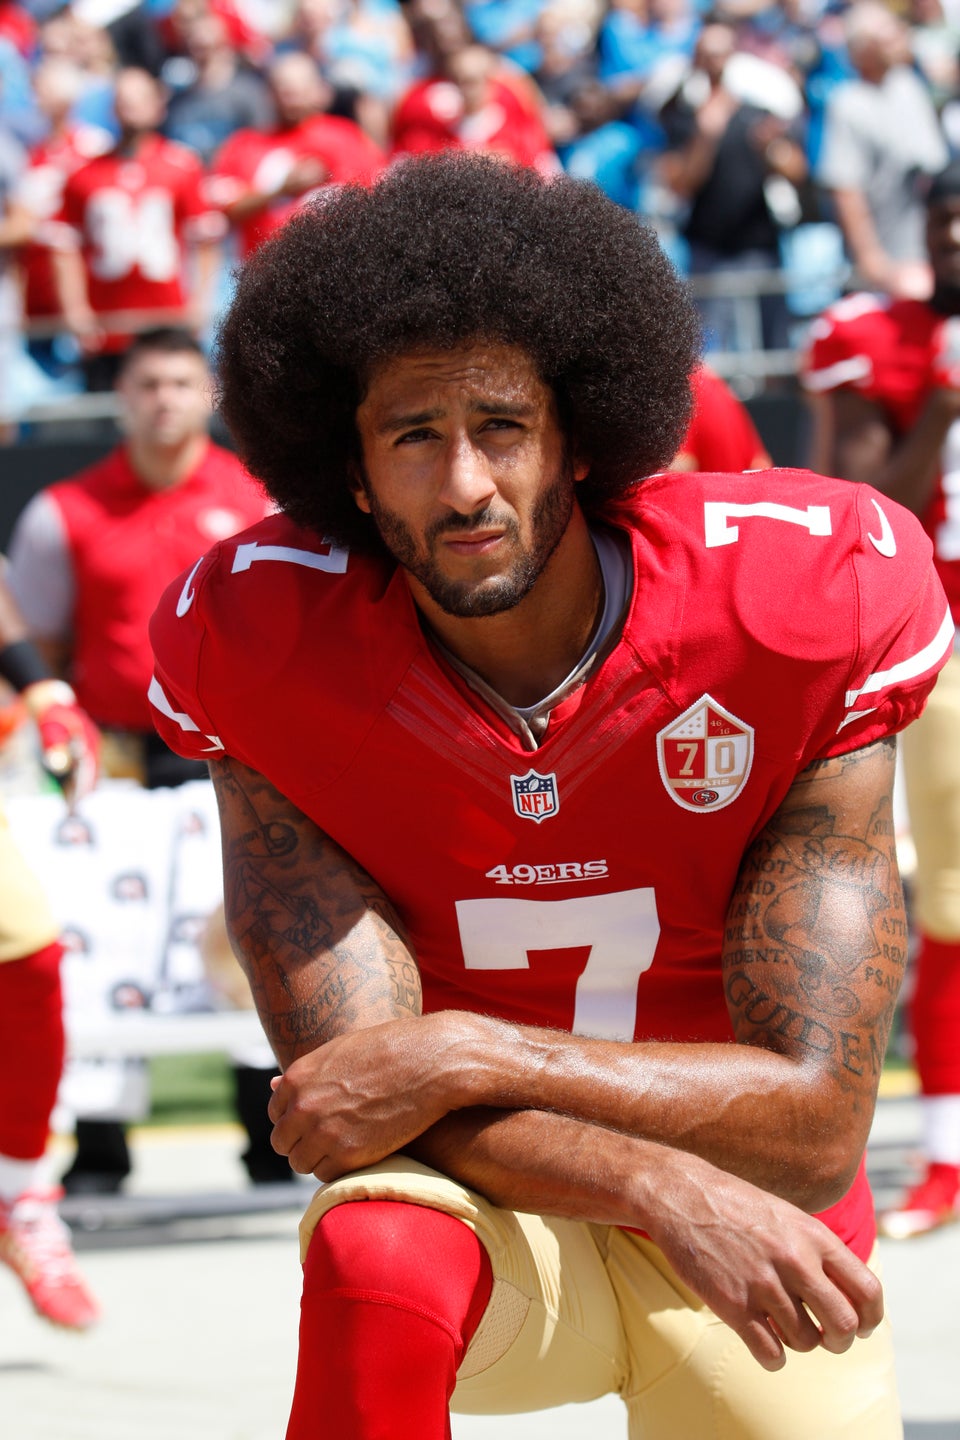 Colin Kaepernick Donated $50k To Meals On Wheels And Fighting for Somalia